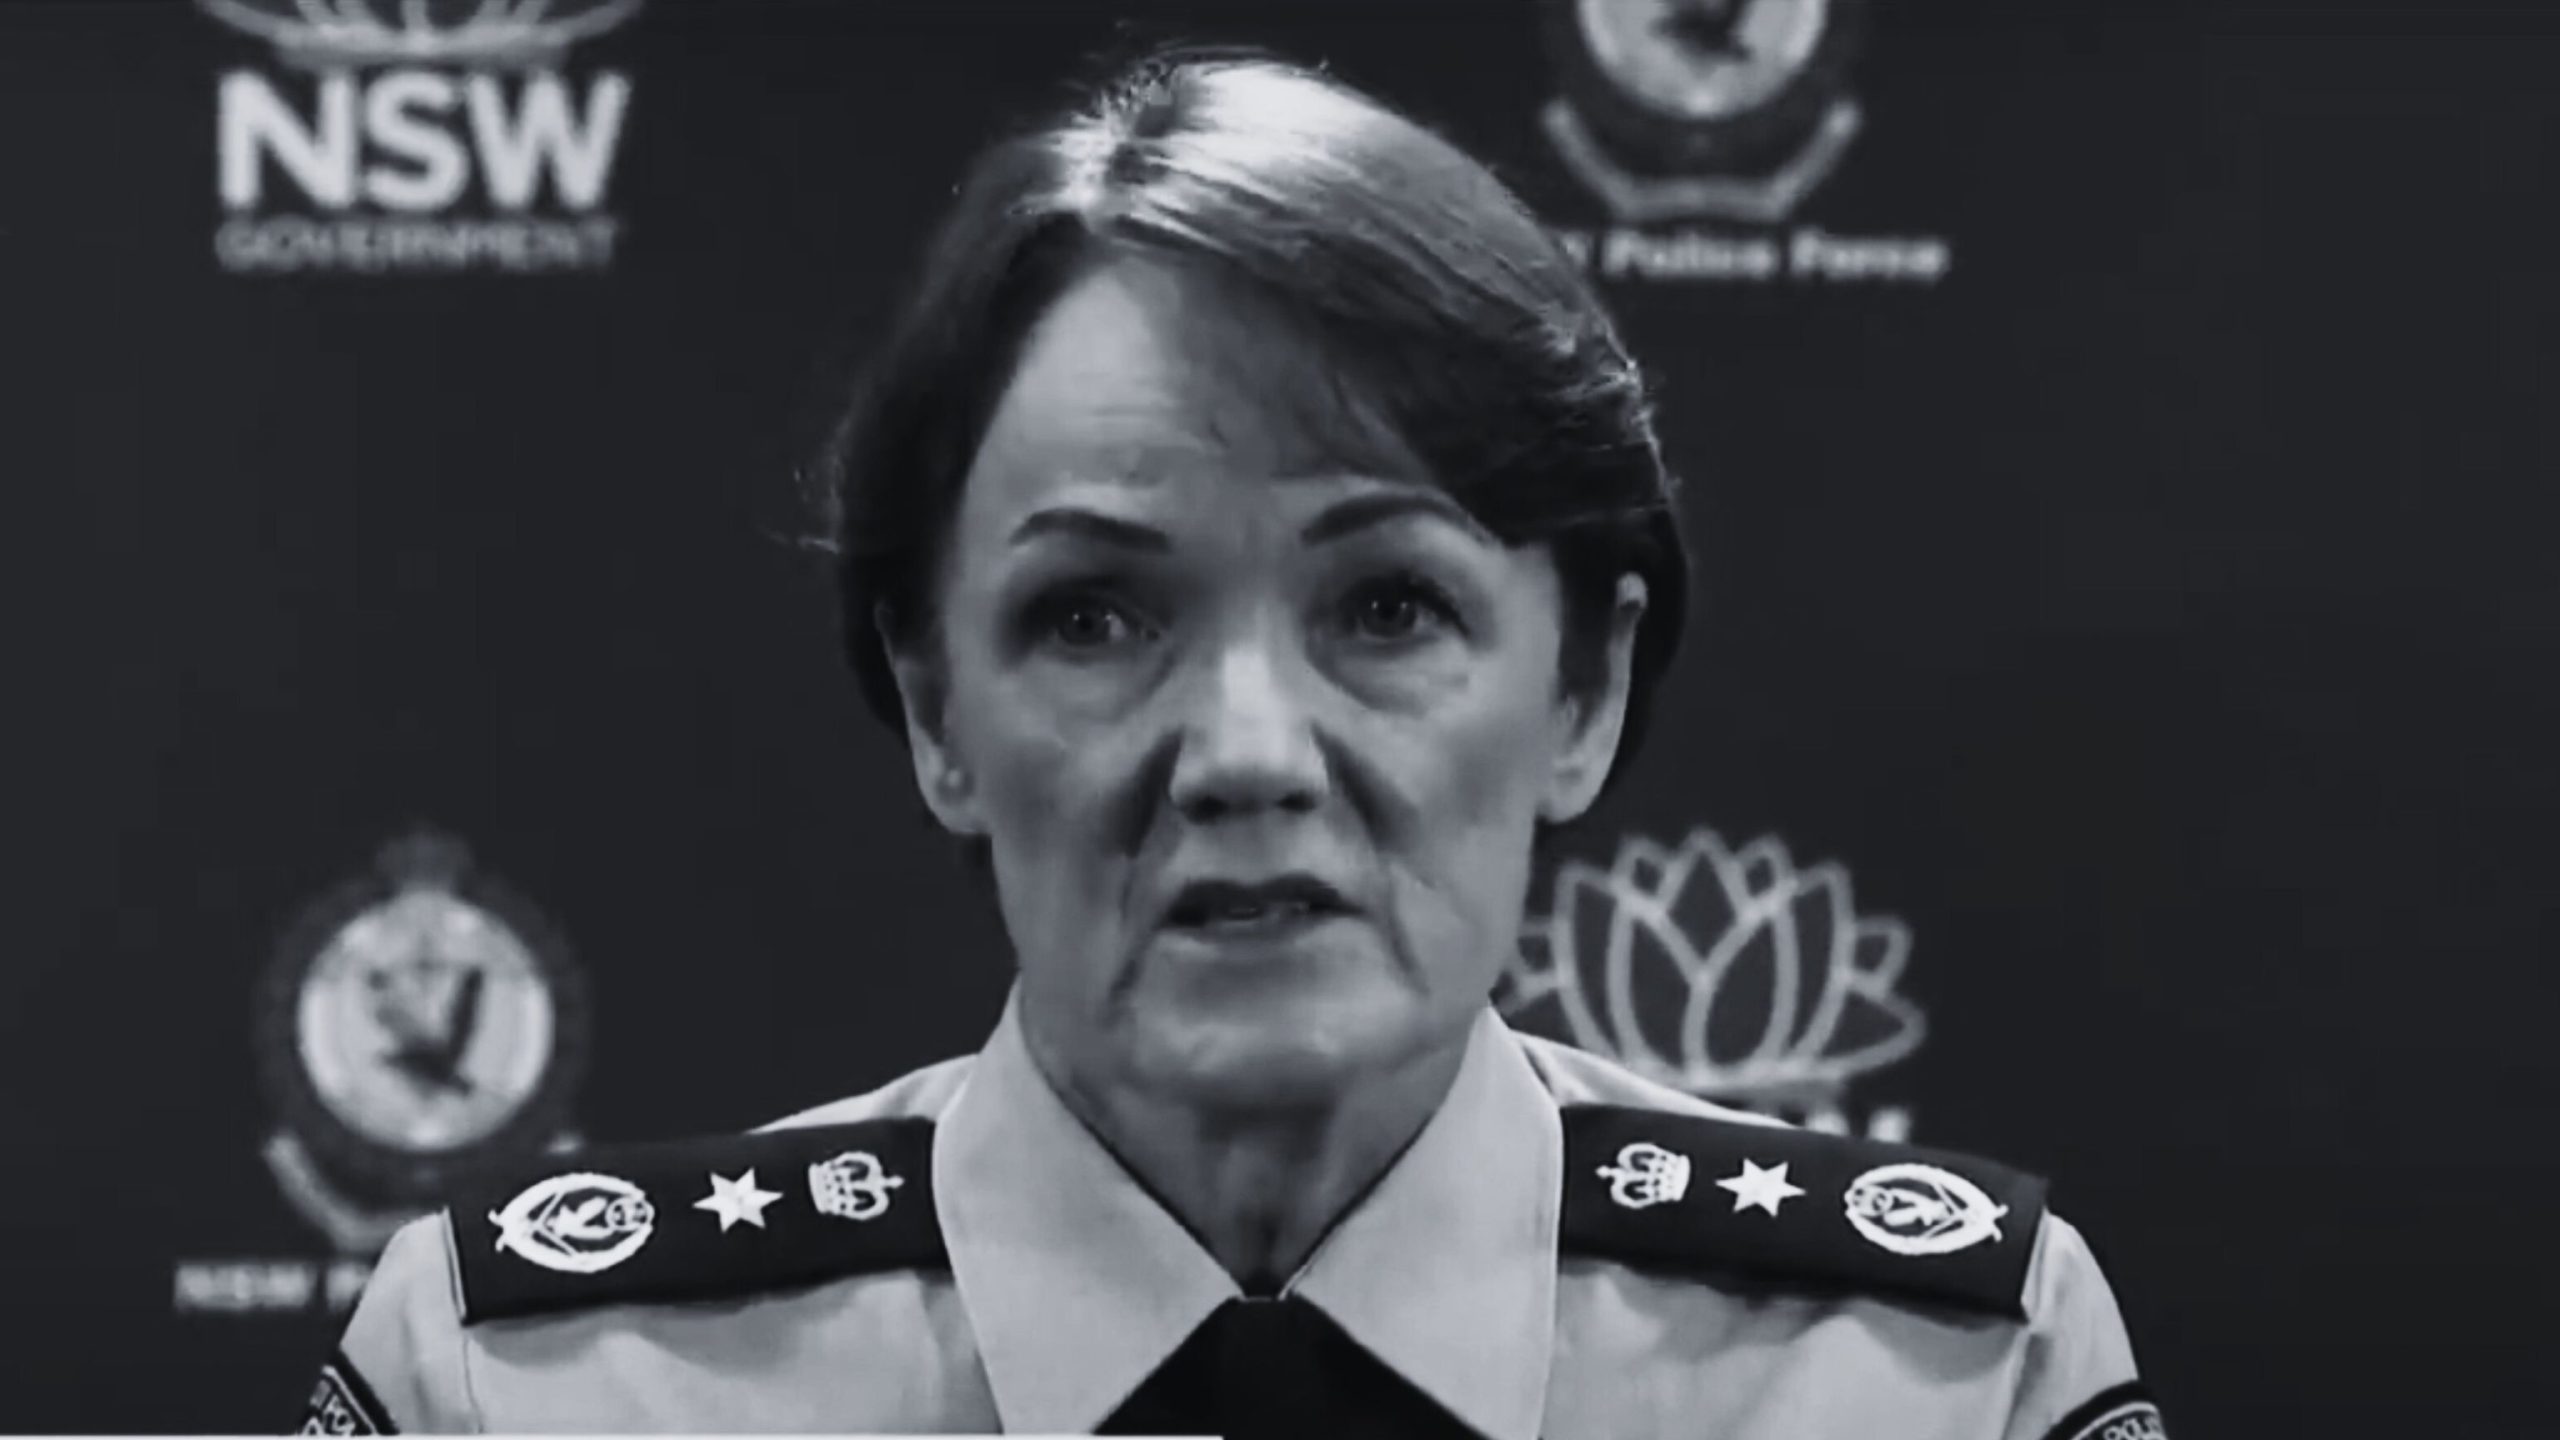 Orwellian Sydney Police: We Will Be the “Source of Truth”